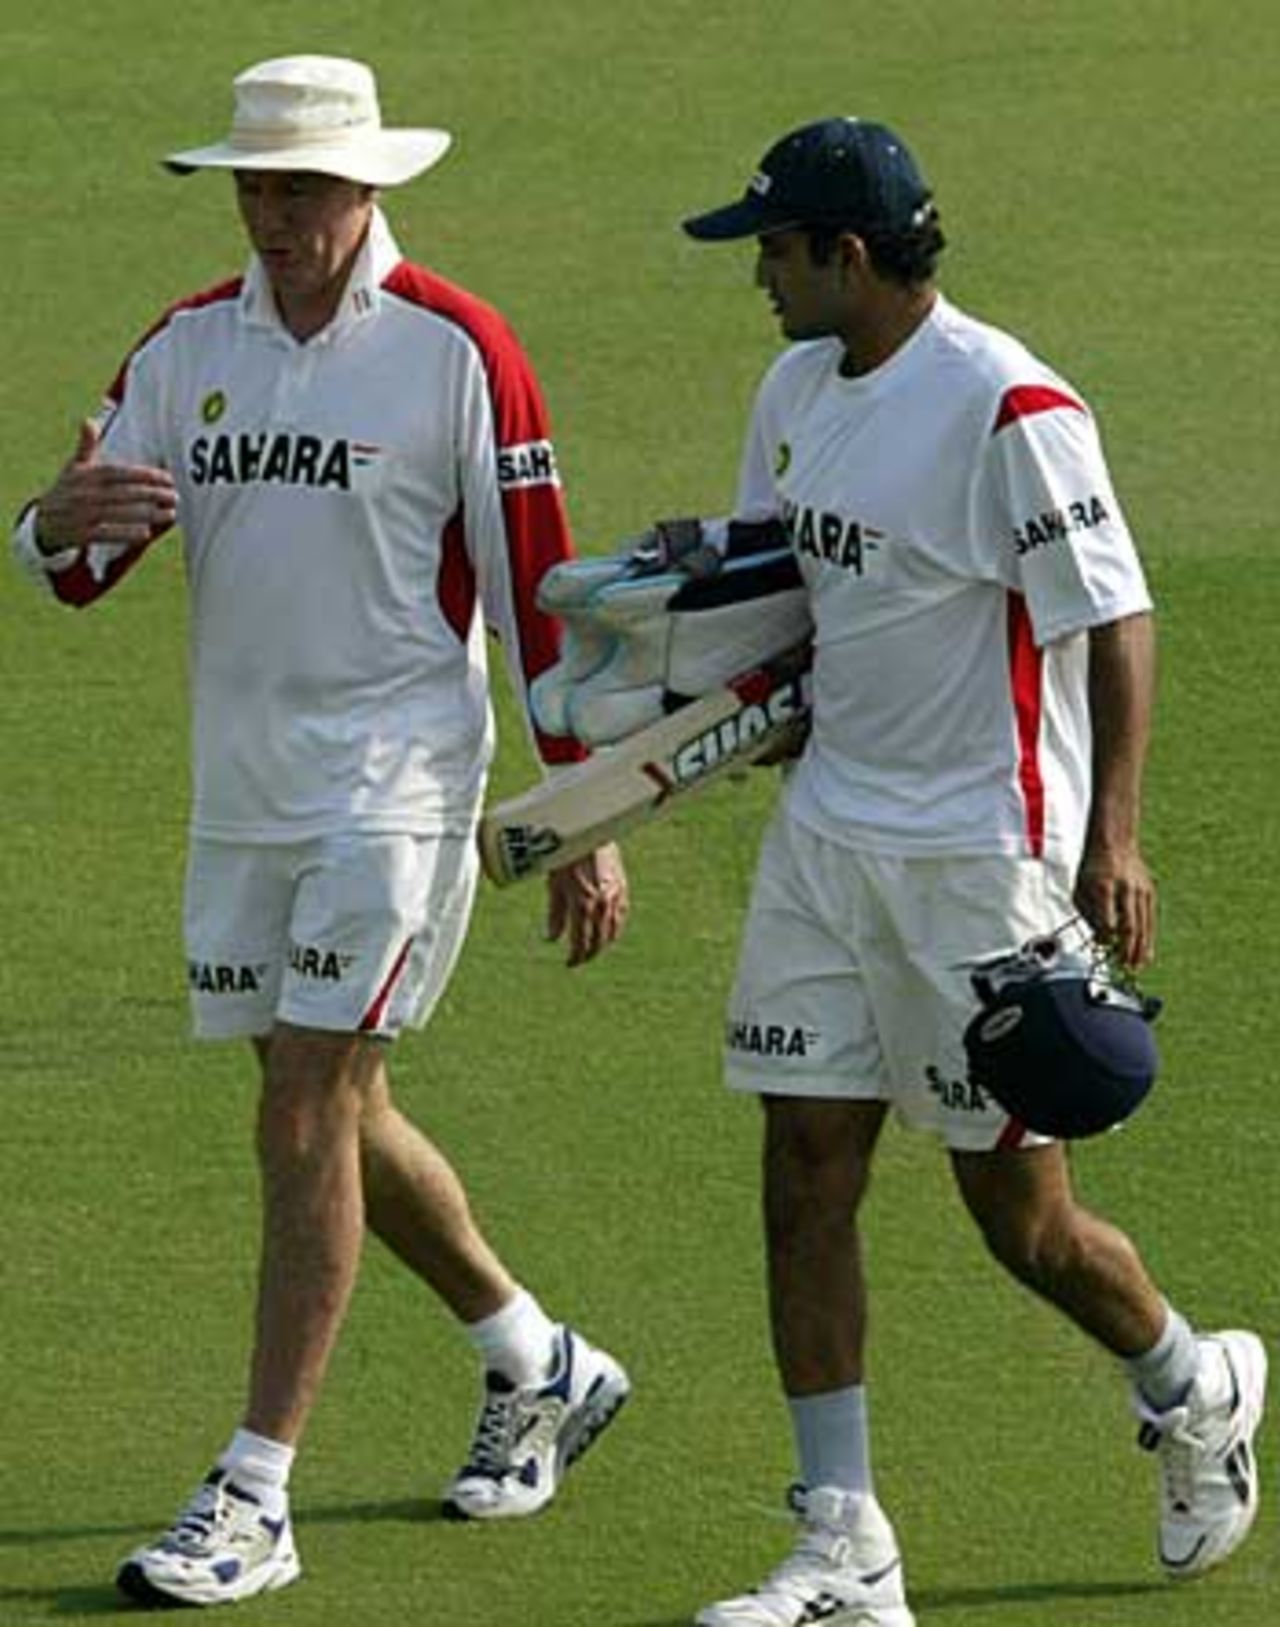 Irfan Pathan talks to Greg Chappell during a practice session, Punjab Cricket Association Ground, Mohali, October 27, 2005